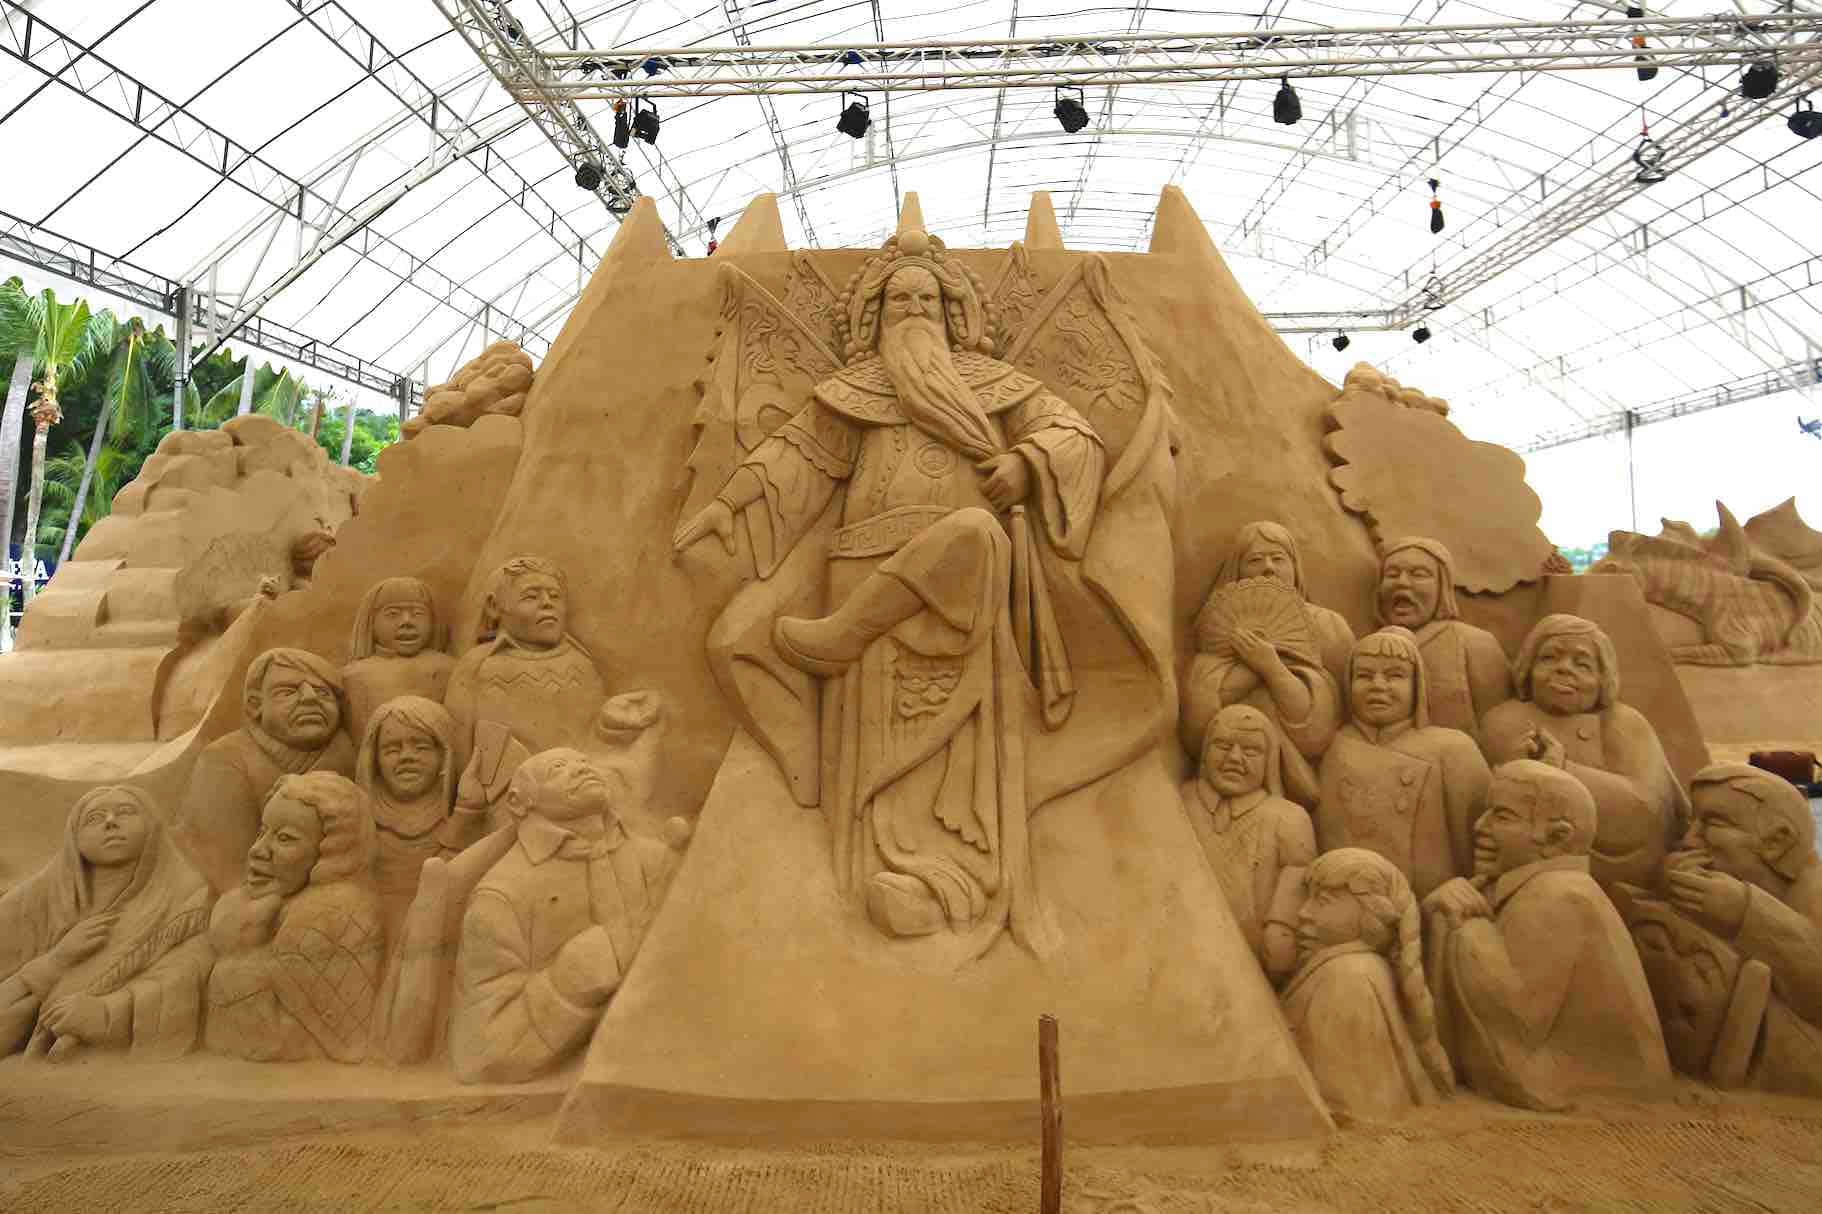 A Large Sand Sculpture With People On It